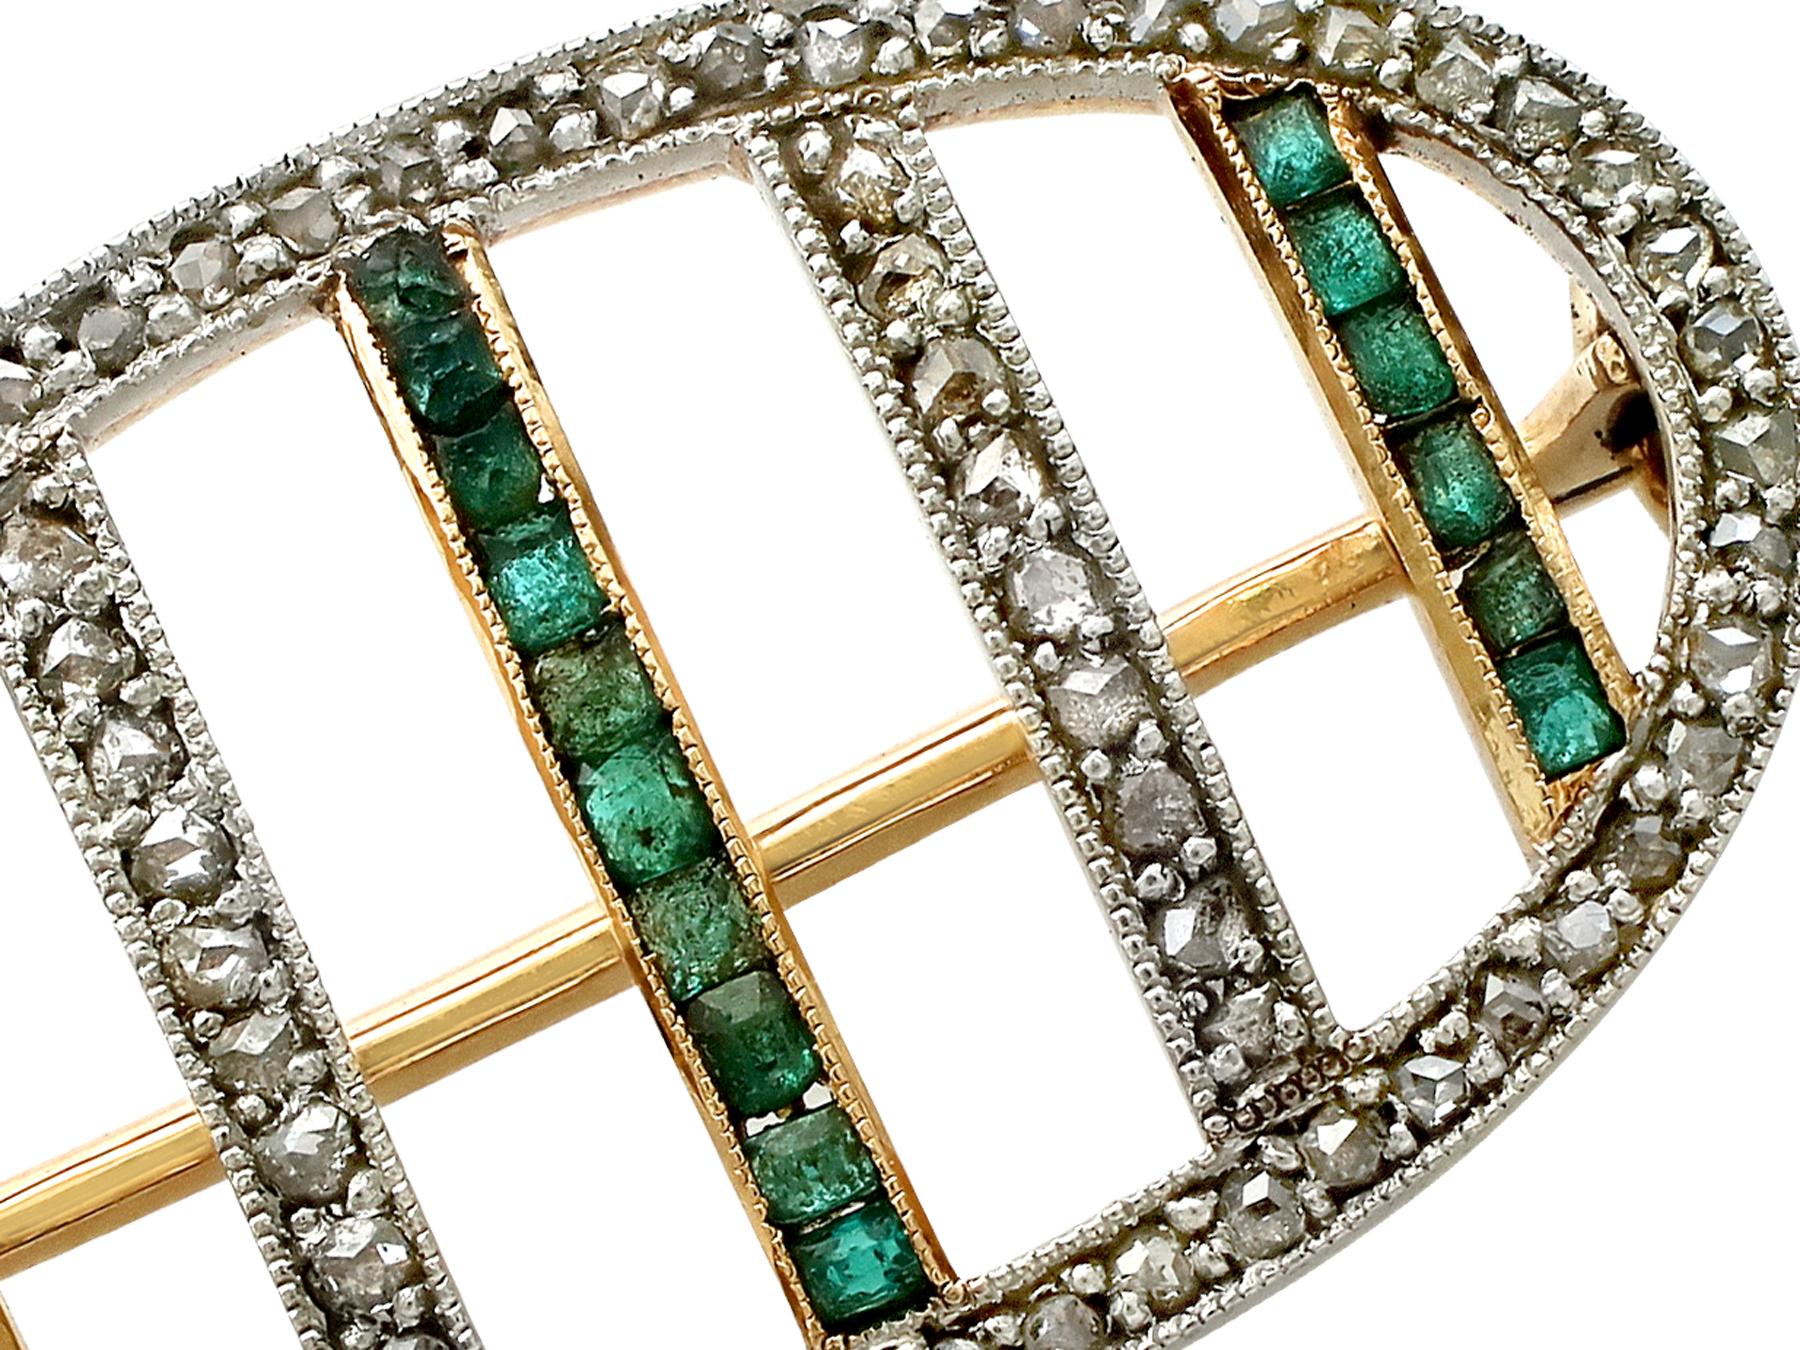 A fine and impressive antique 0.22 carat natural emerald and 0.39 carat diamond, 18 karat yellow gold, platinum set brooch; part of our antique jewelry and estate jewelry collections.

This impressive antique emerald brooch has been crafted in 18k